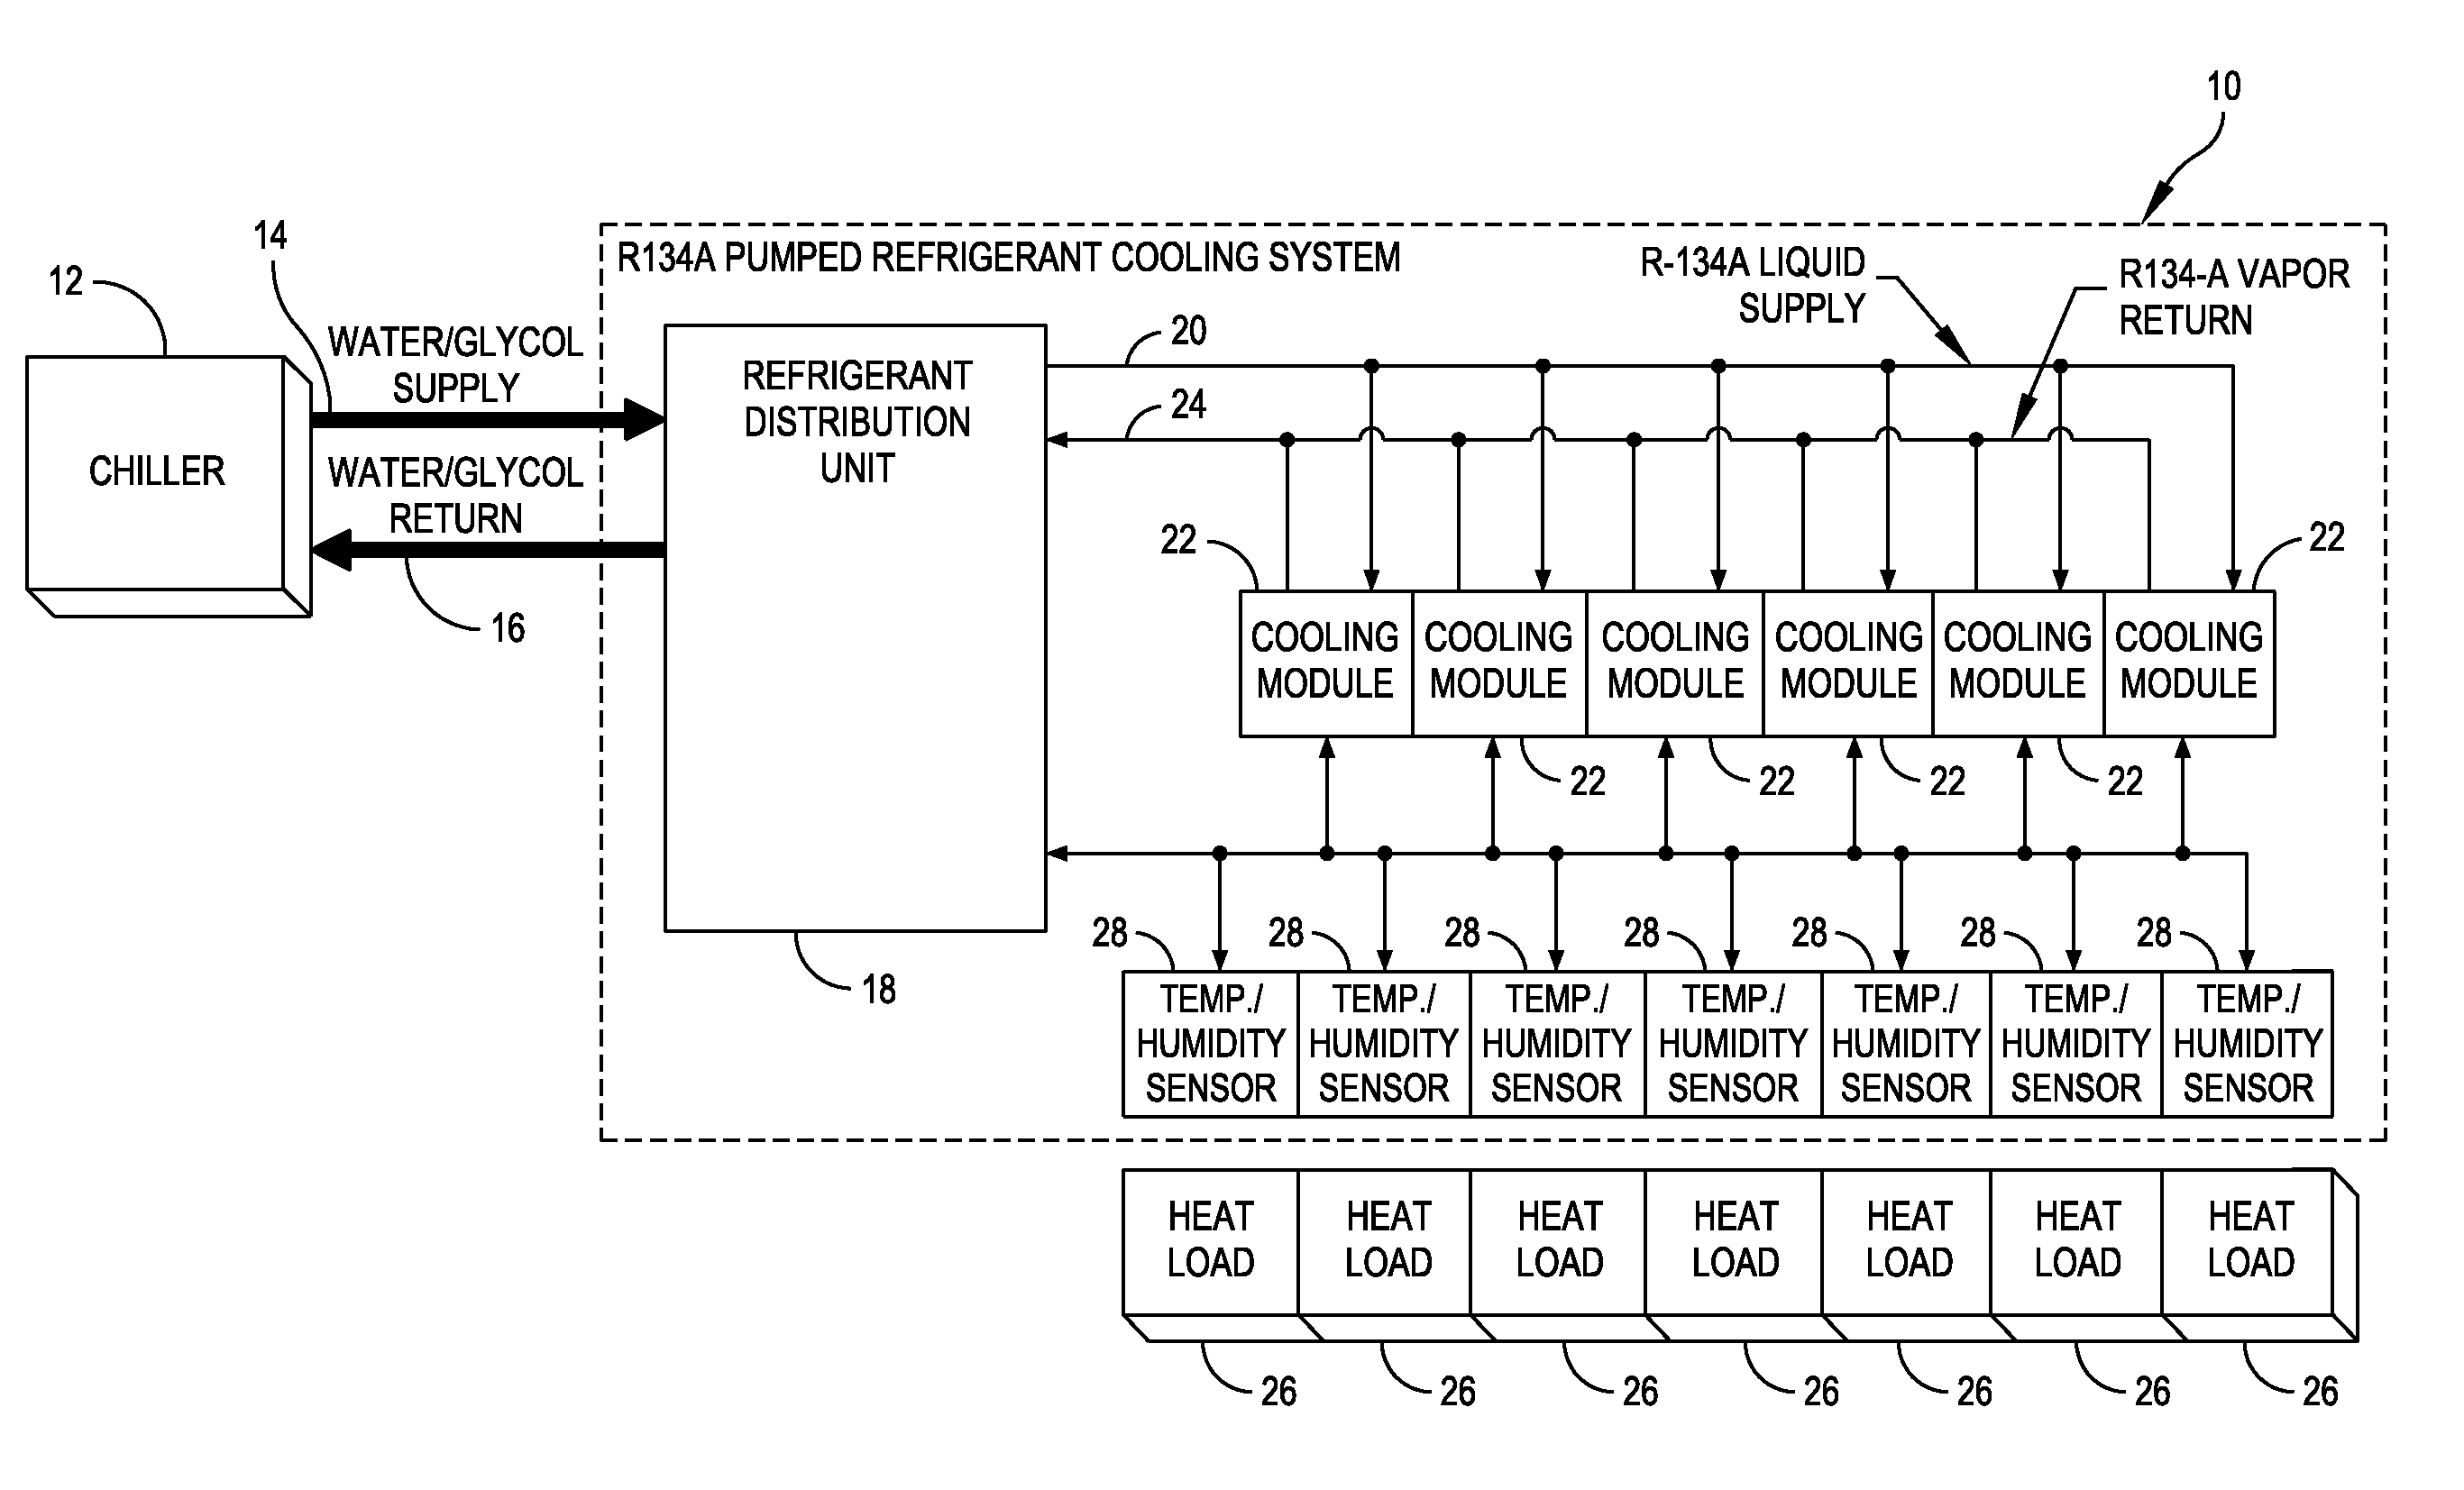 Systems and methods for controlling load dynamics in a pumped refrigerant cooling system